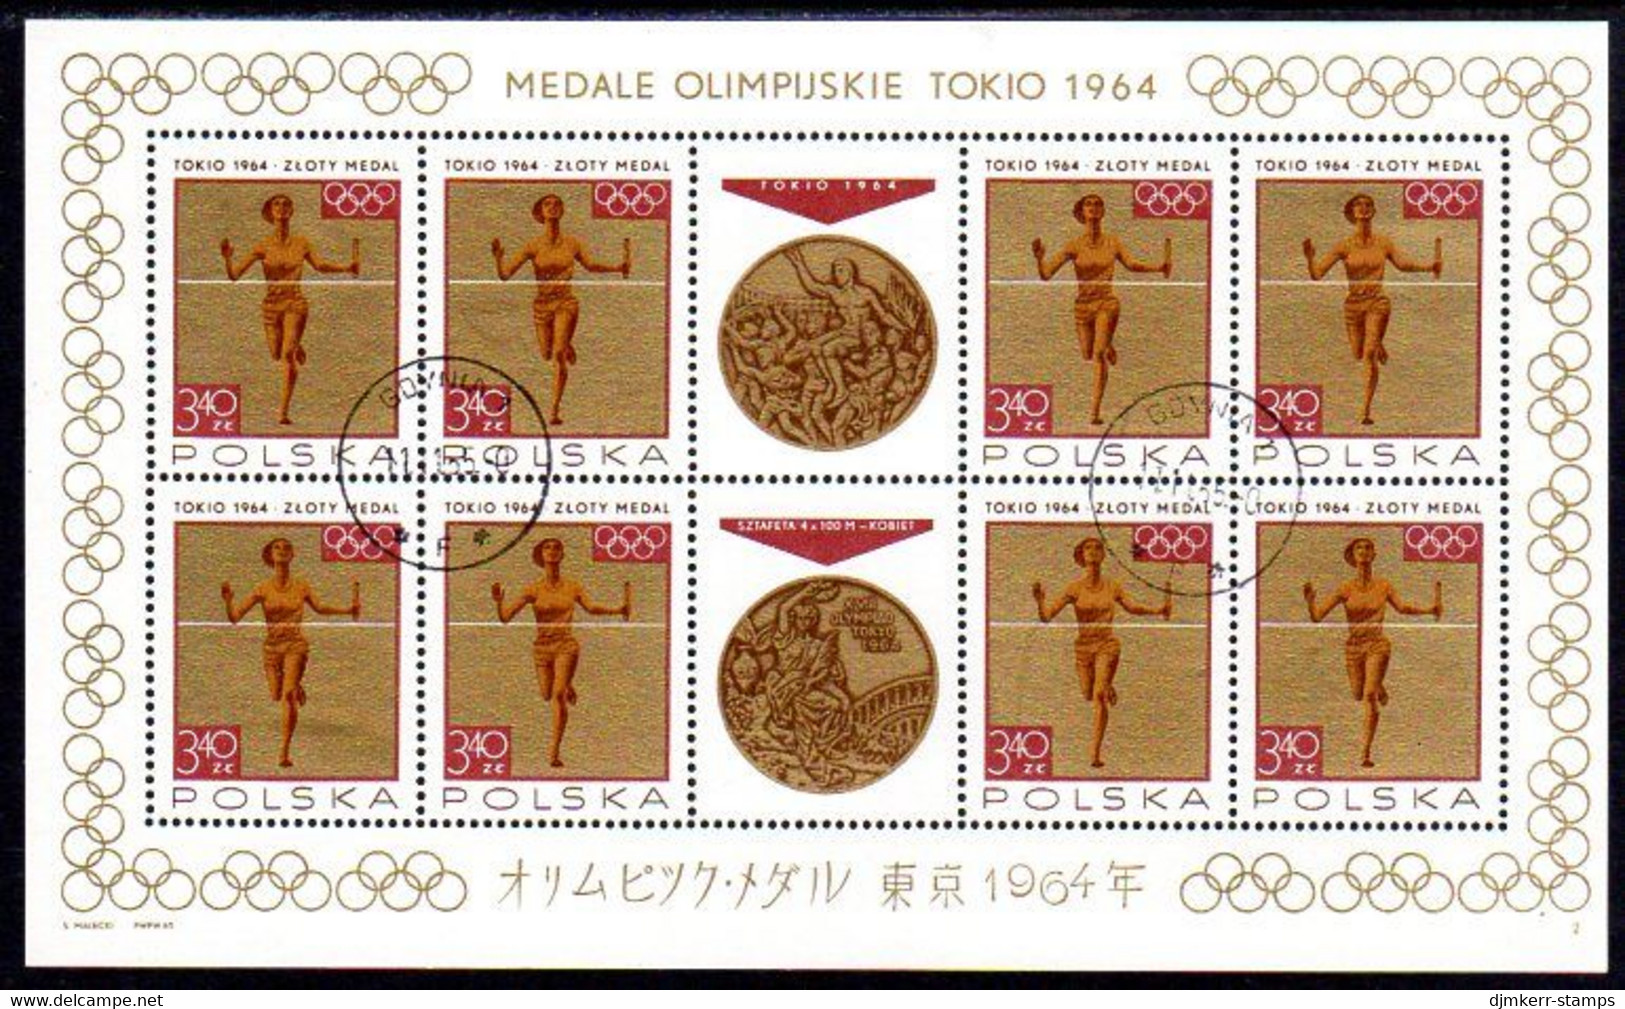 POLAND 1965 Olympic Medal Winners sheetlets used.  Michel 1623-30 Kb